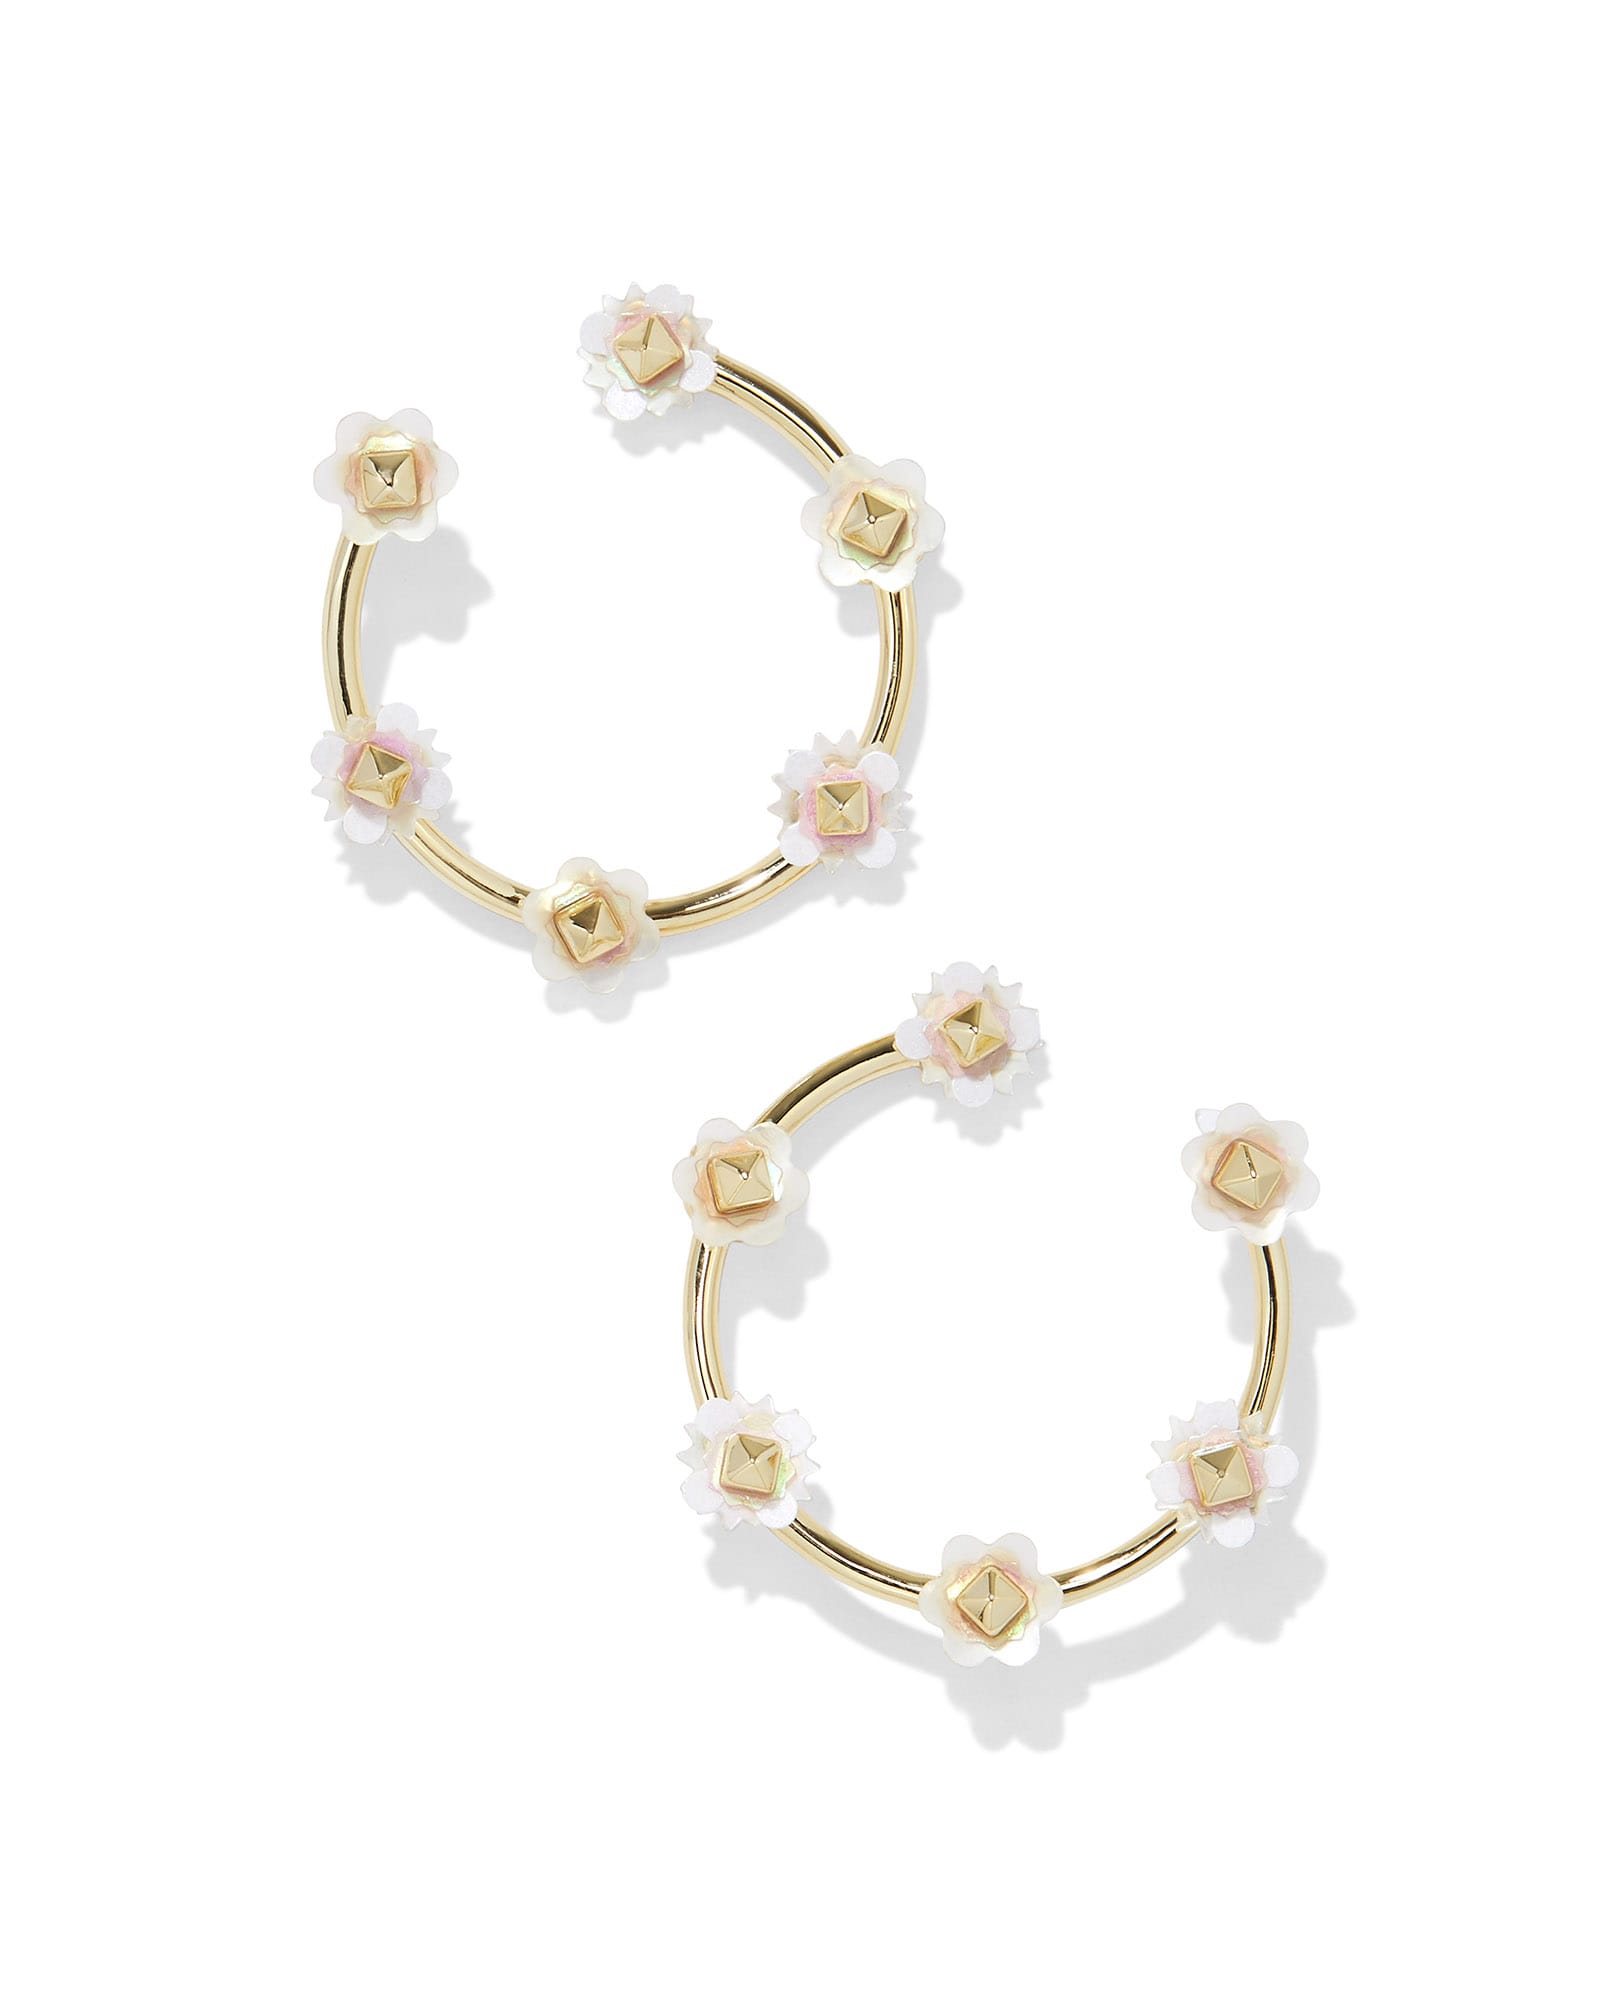 Deliah Gold Open Frame Hoops in Iridescent White Mix